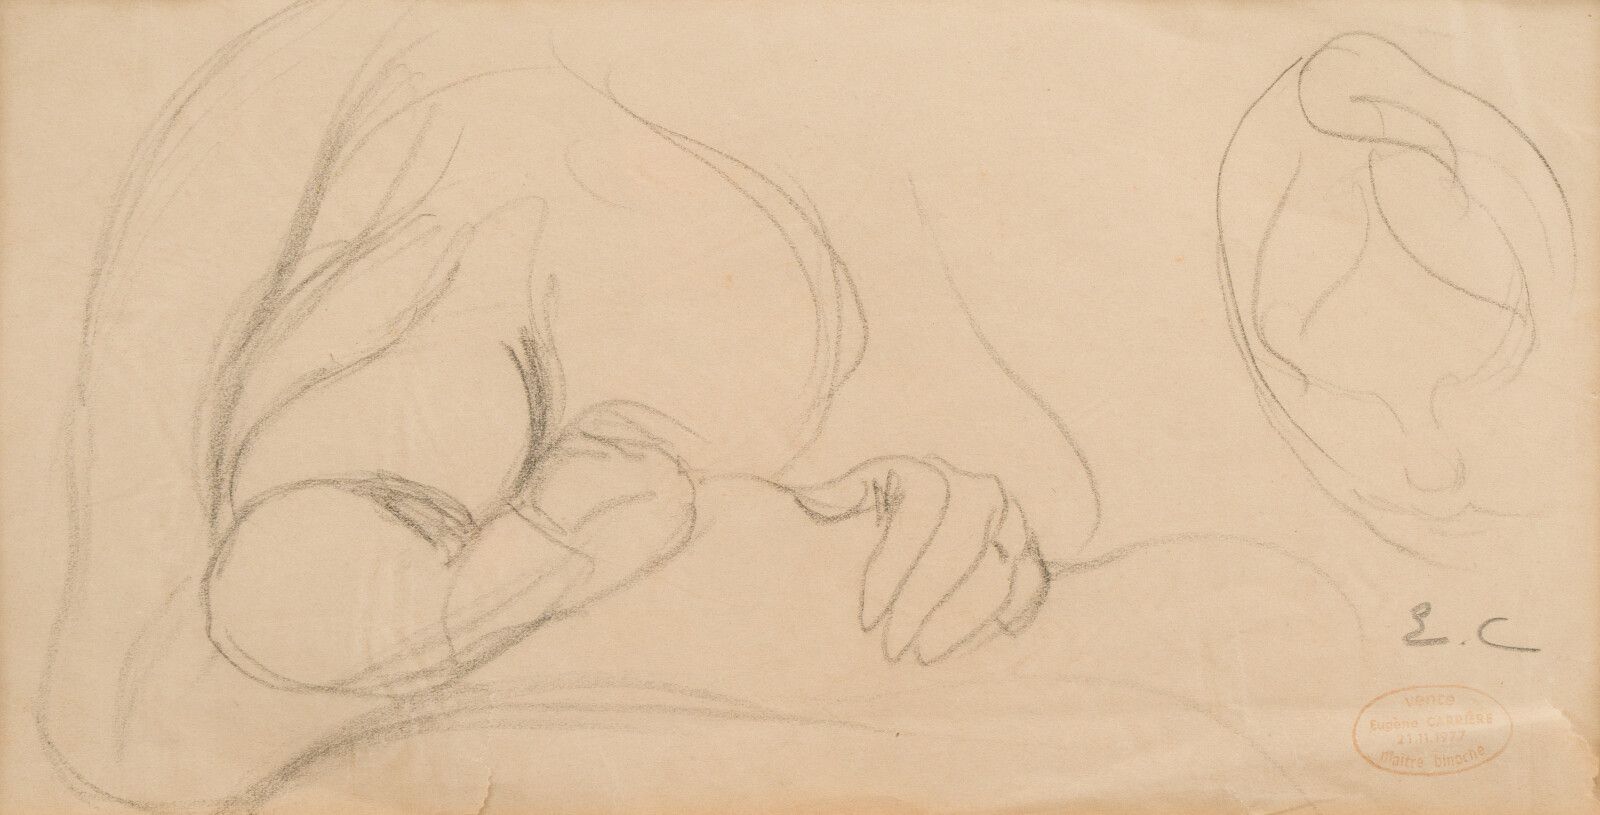 Null 43. Eugène CARRIERE (1849-1906)

Breastfeeding Woman

Drawing on paper.

Mo&hellip;